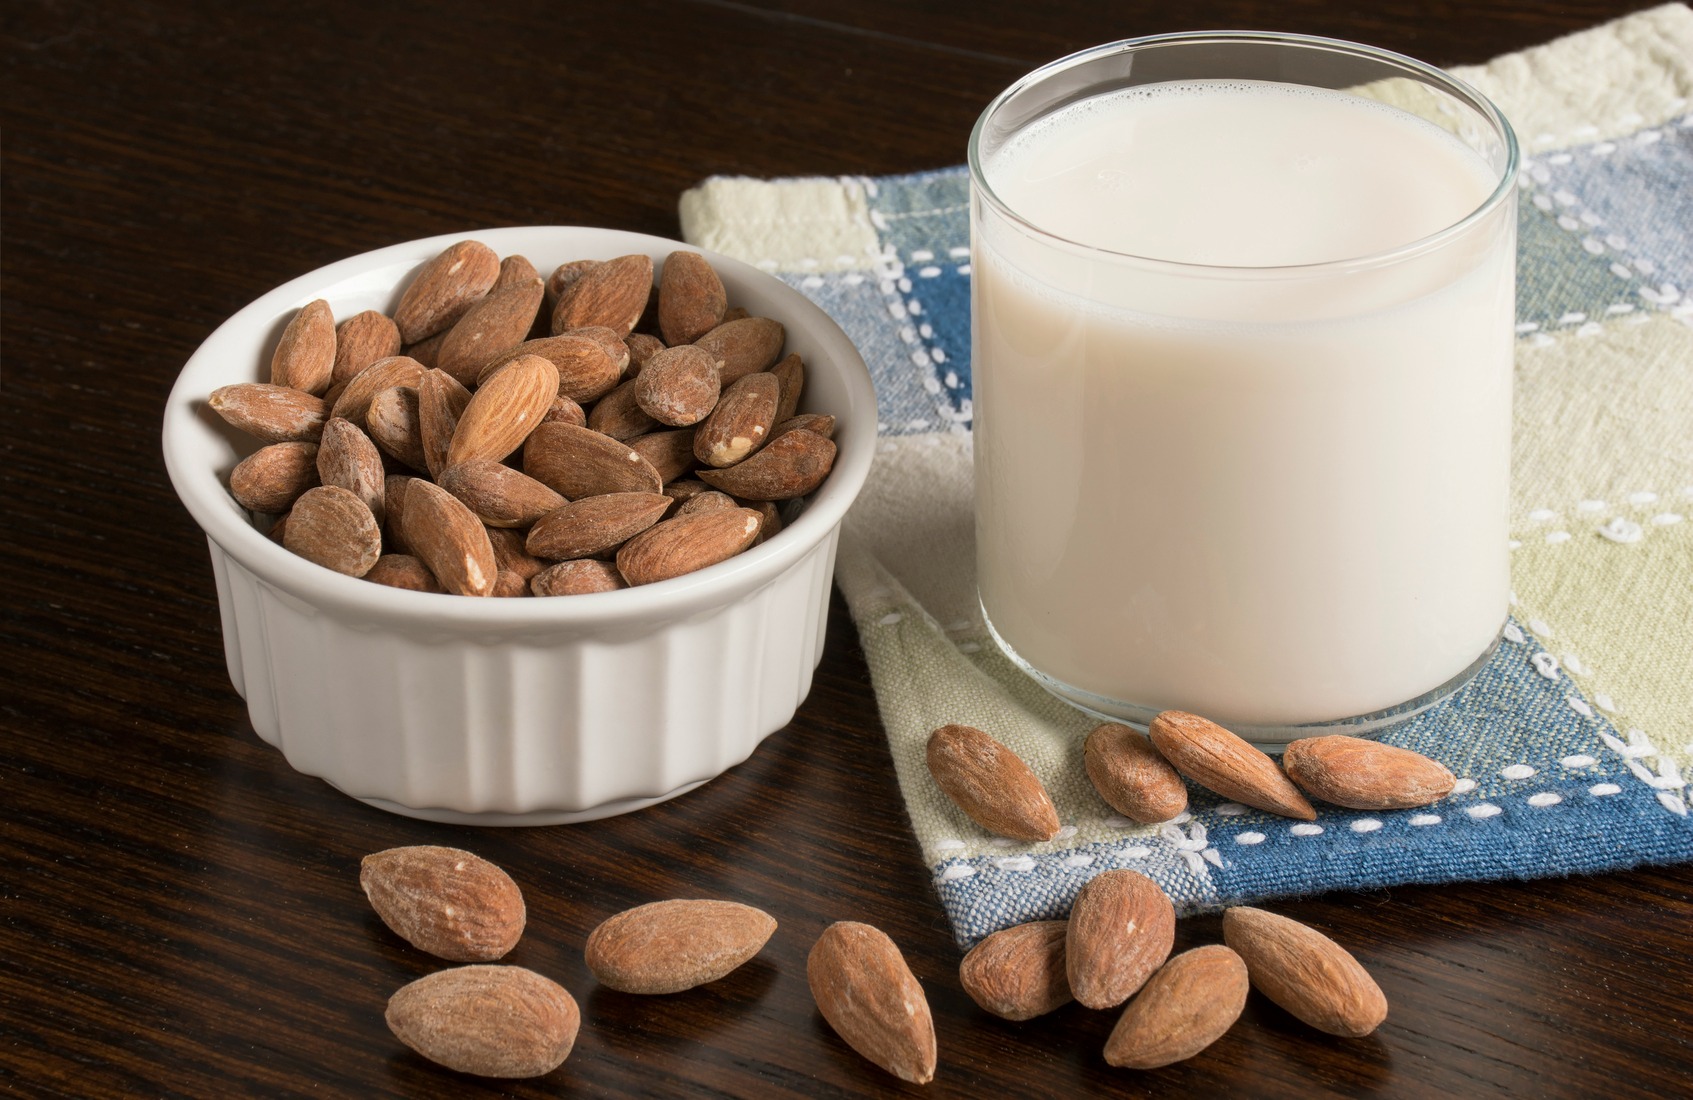 How to choose the best plant milk